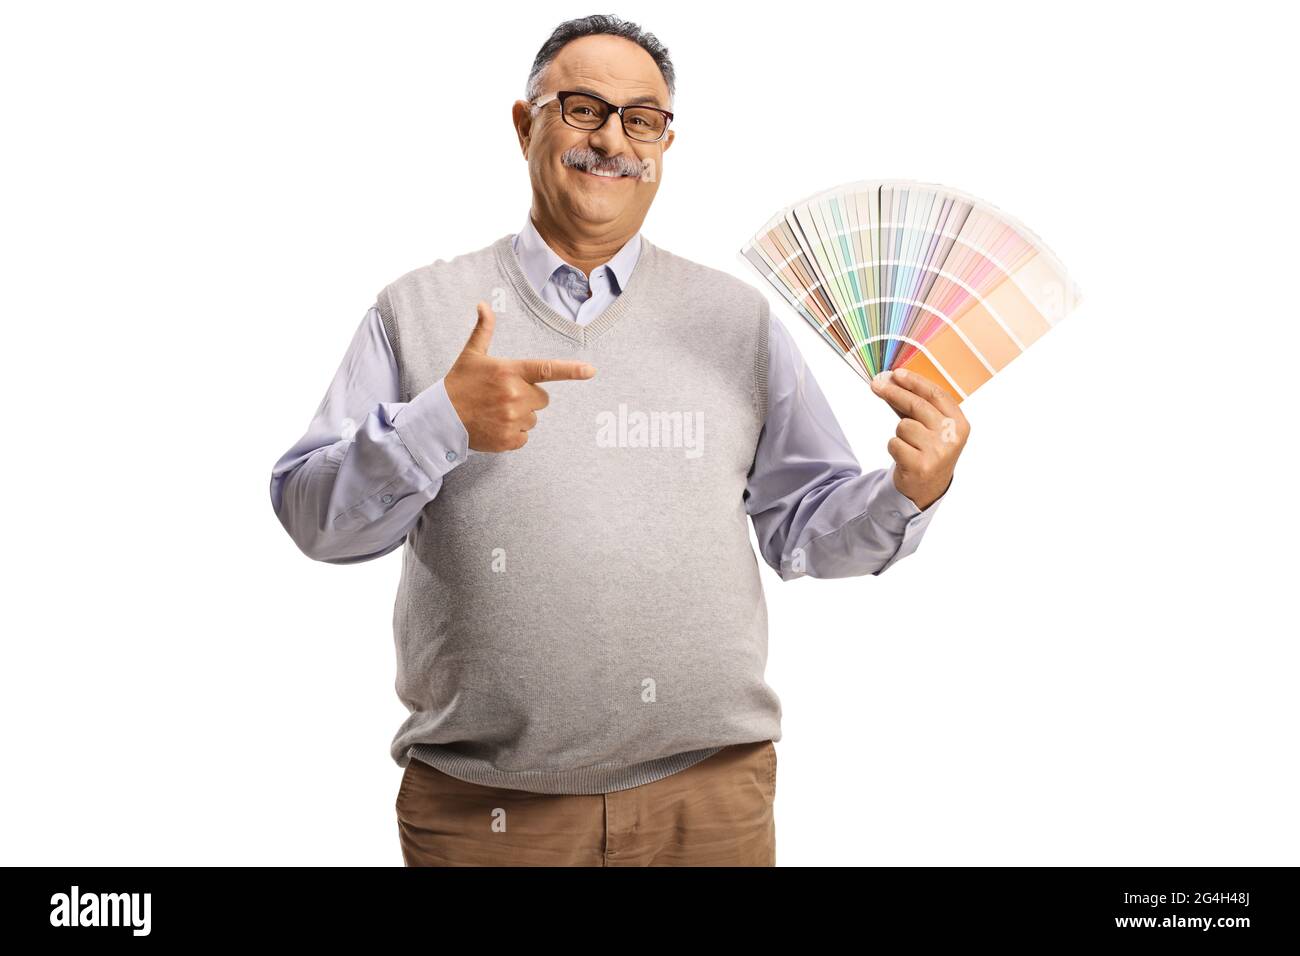 Smiling mature man holding a color palette isolated on white background Stock Photo